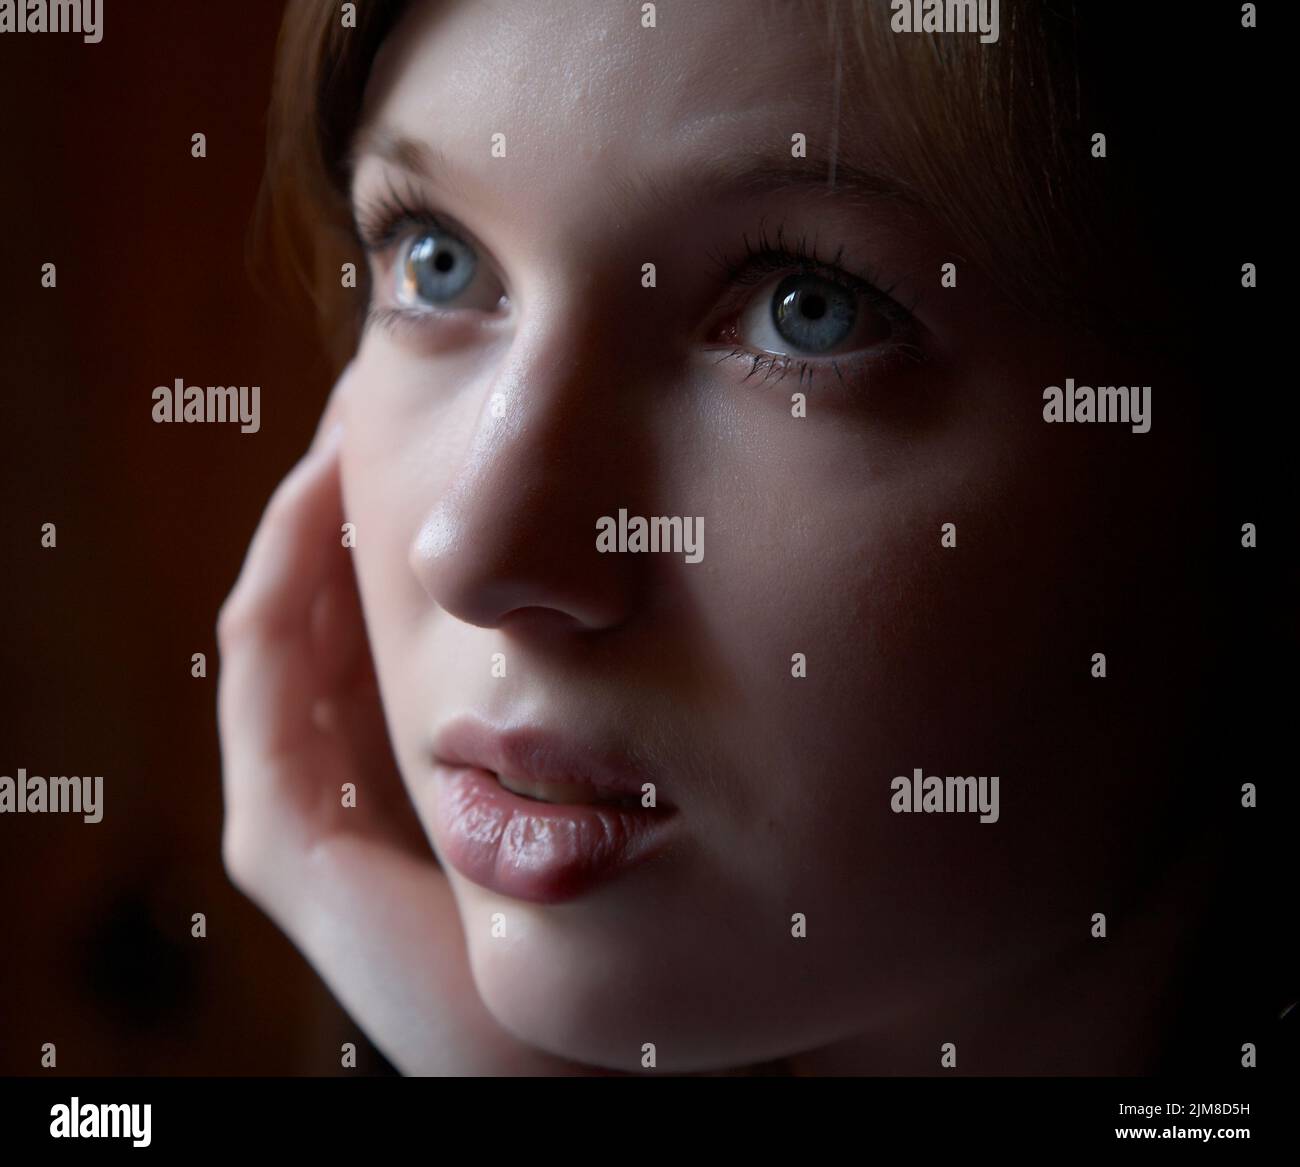 Portrait of the girl in a dark tonality Stock Photo